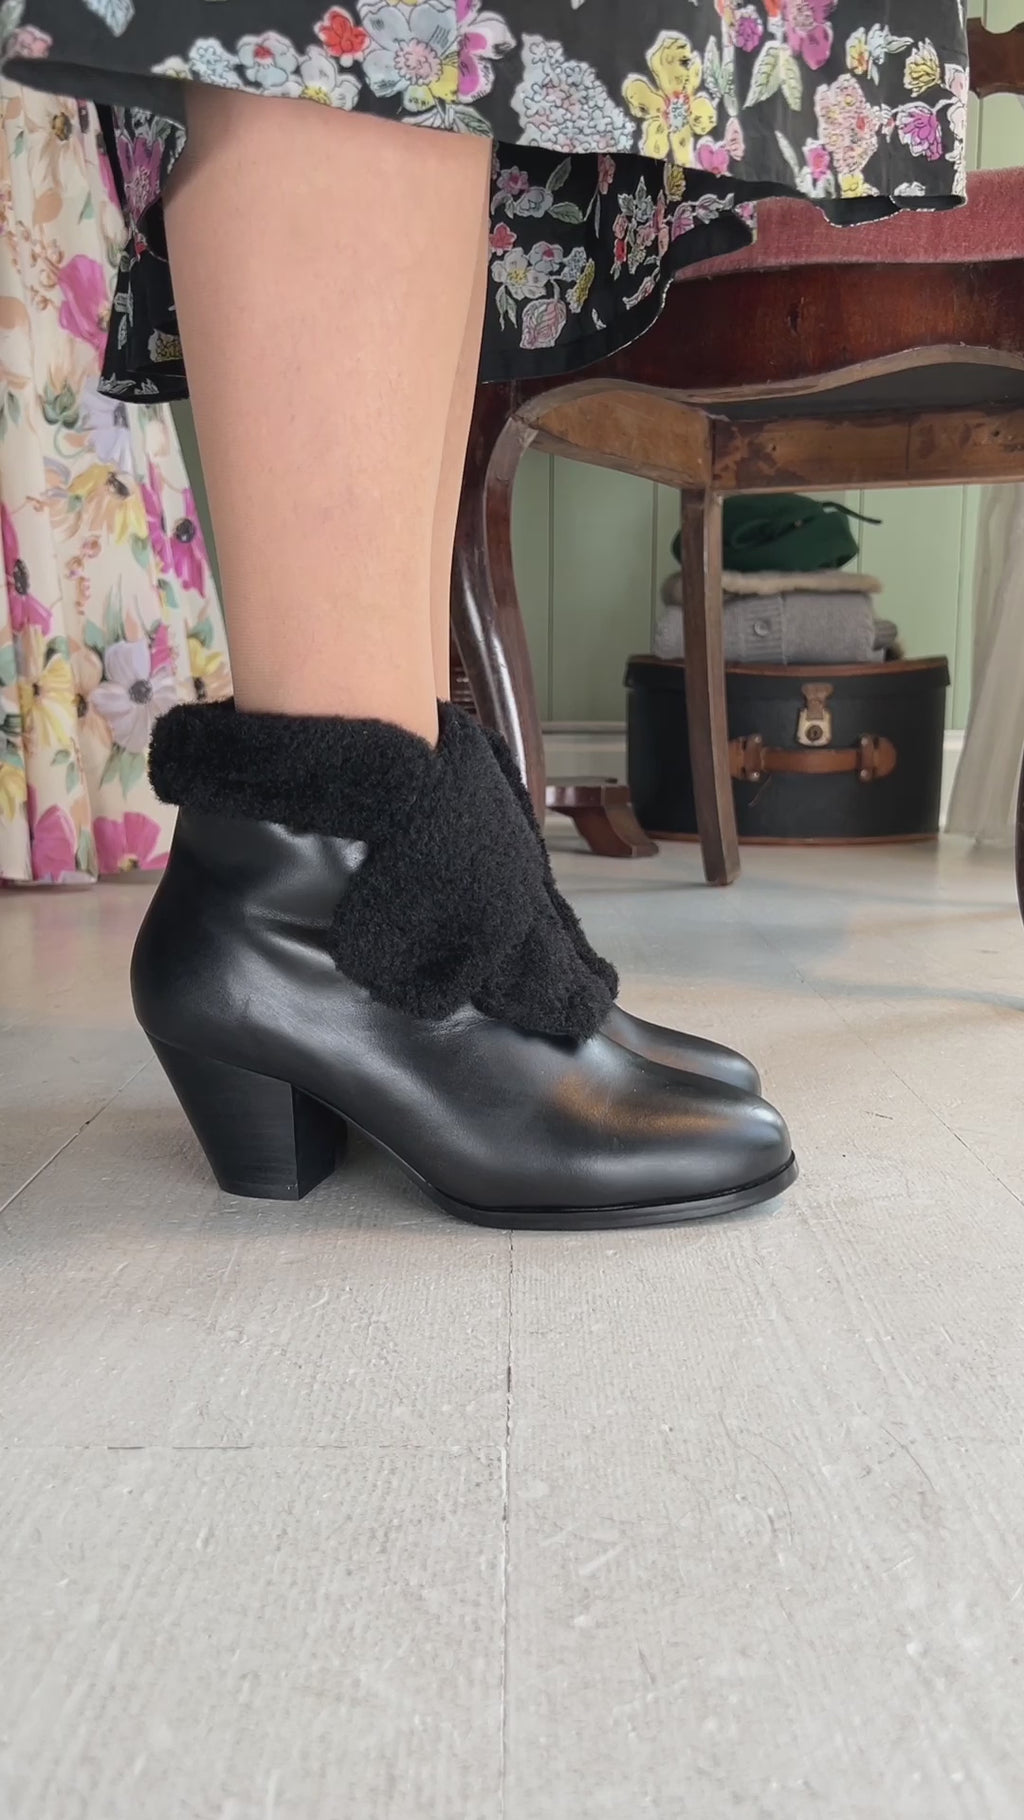 Soft 1940s /1950s style booties with fur - Black - Karin – memery